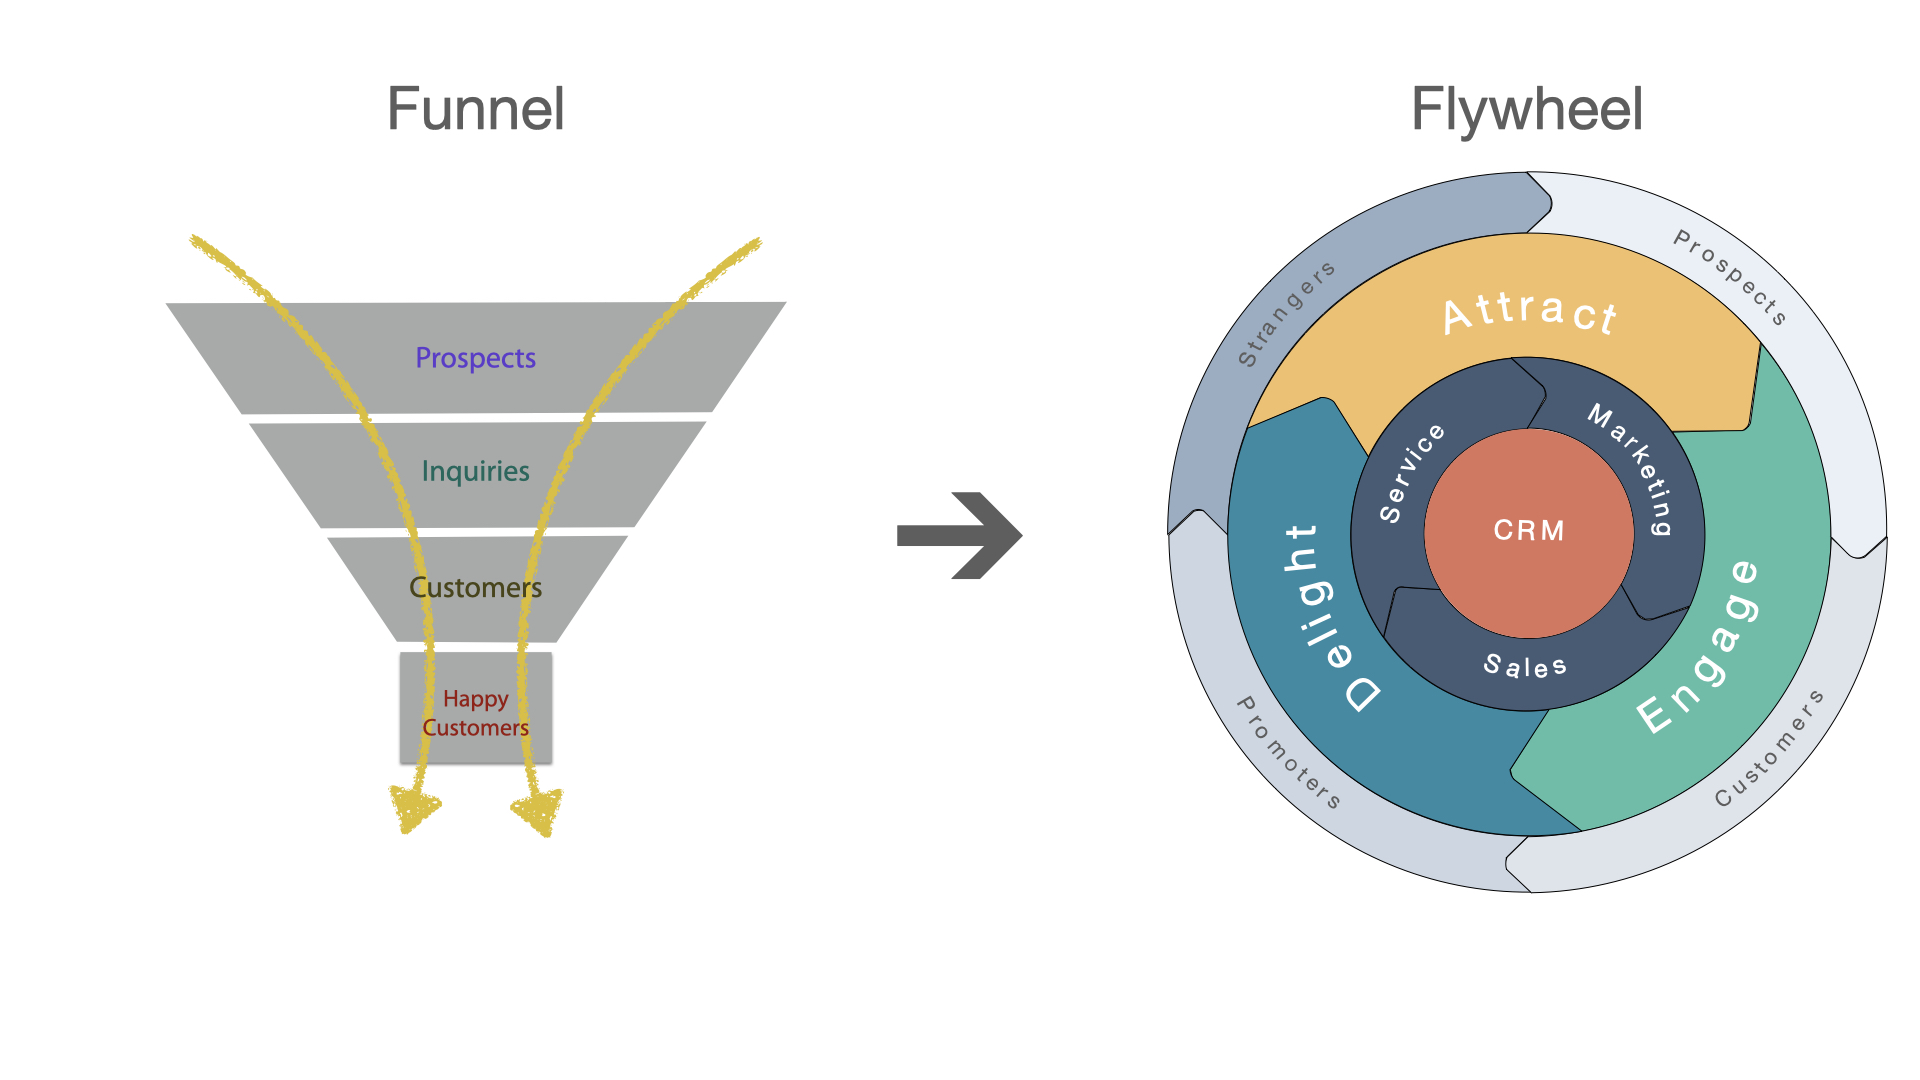 Transitioning from funnel to flywheel model